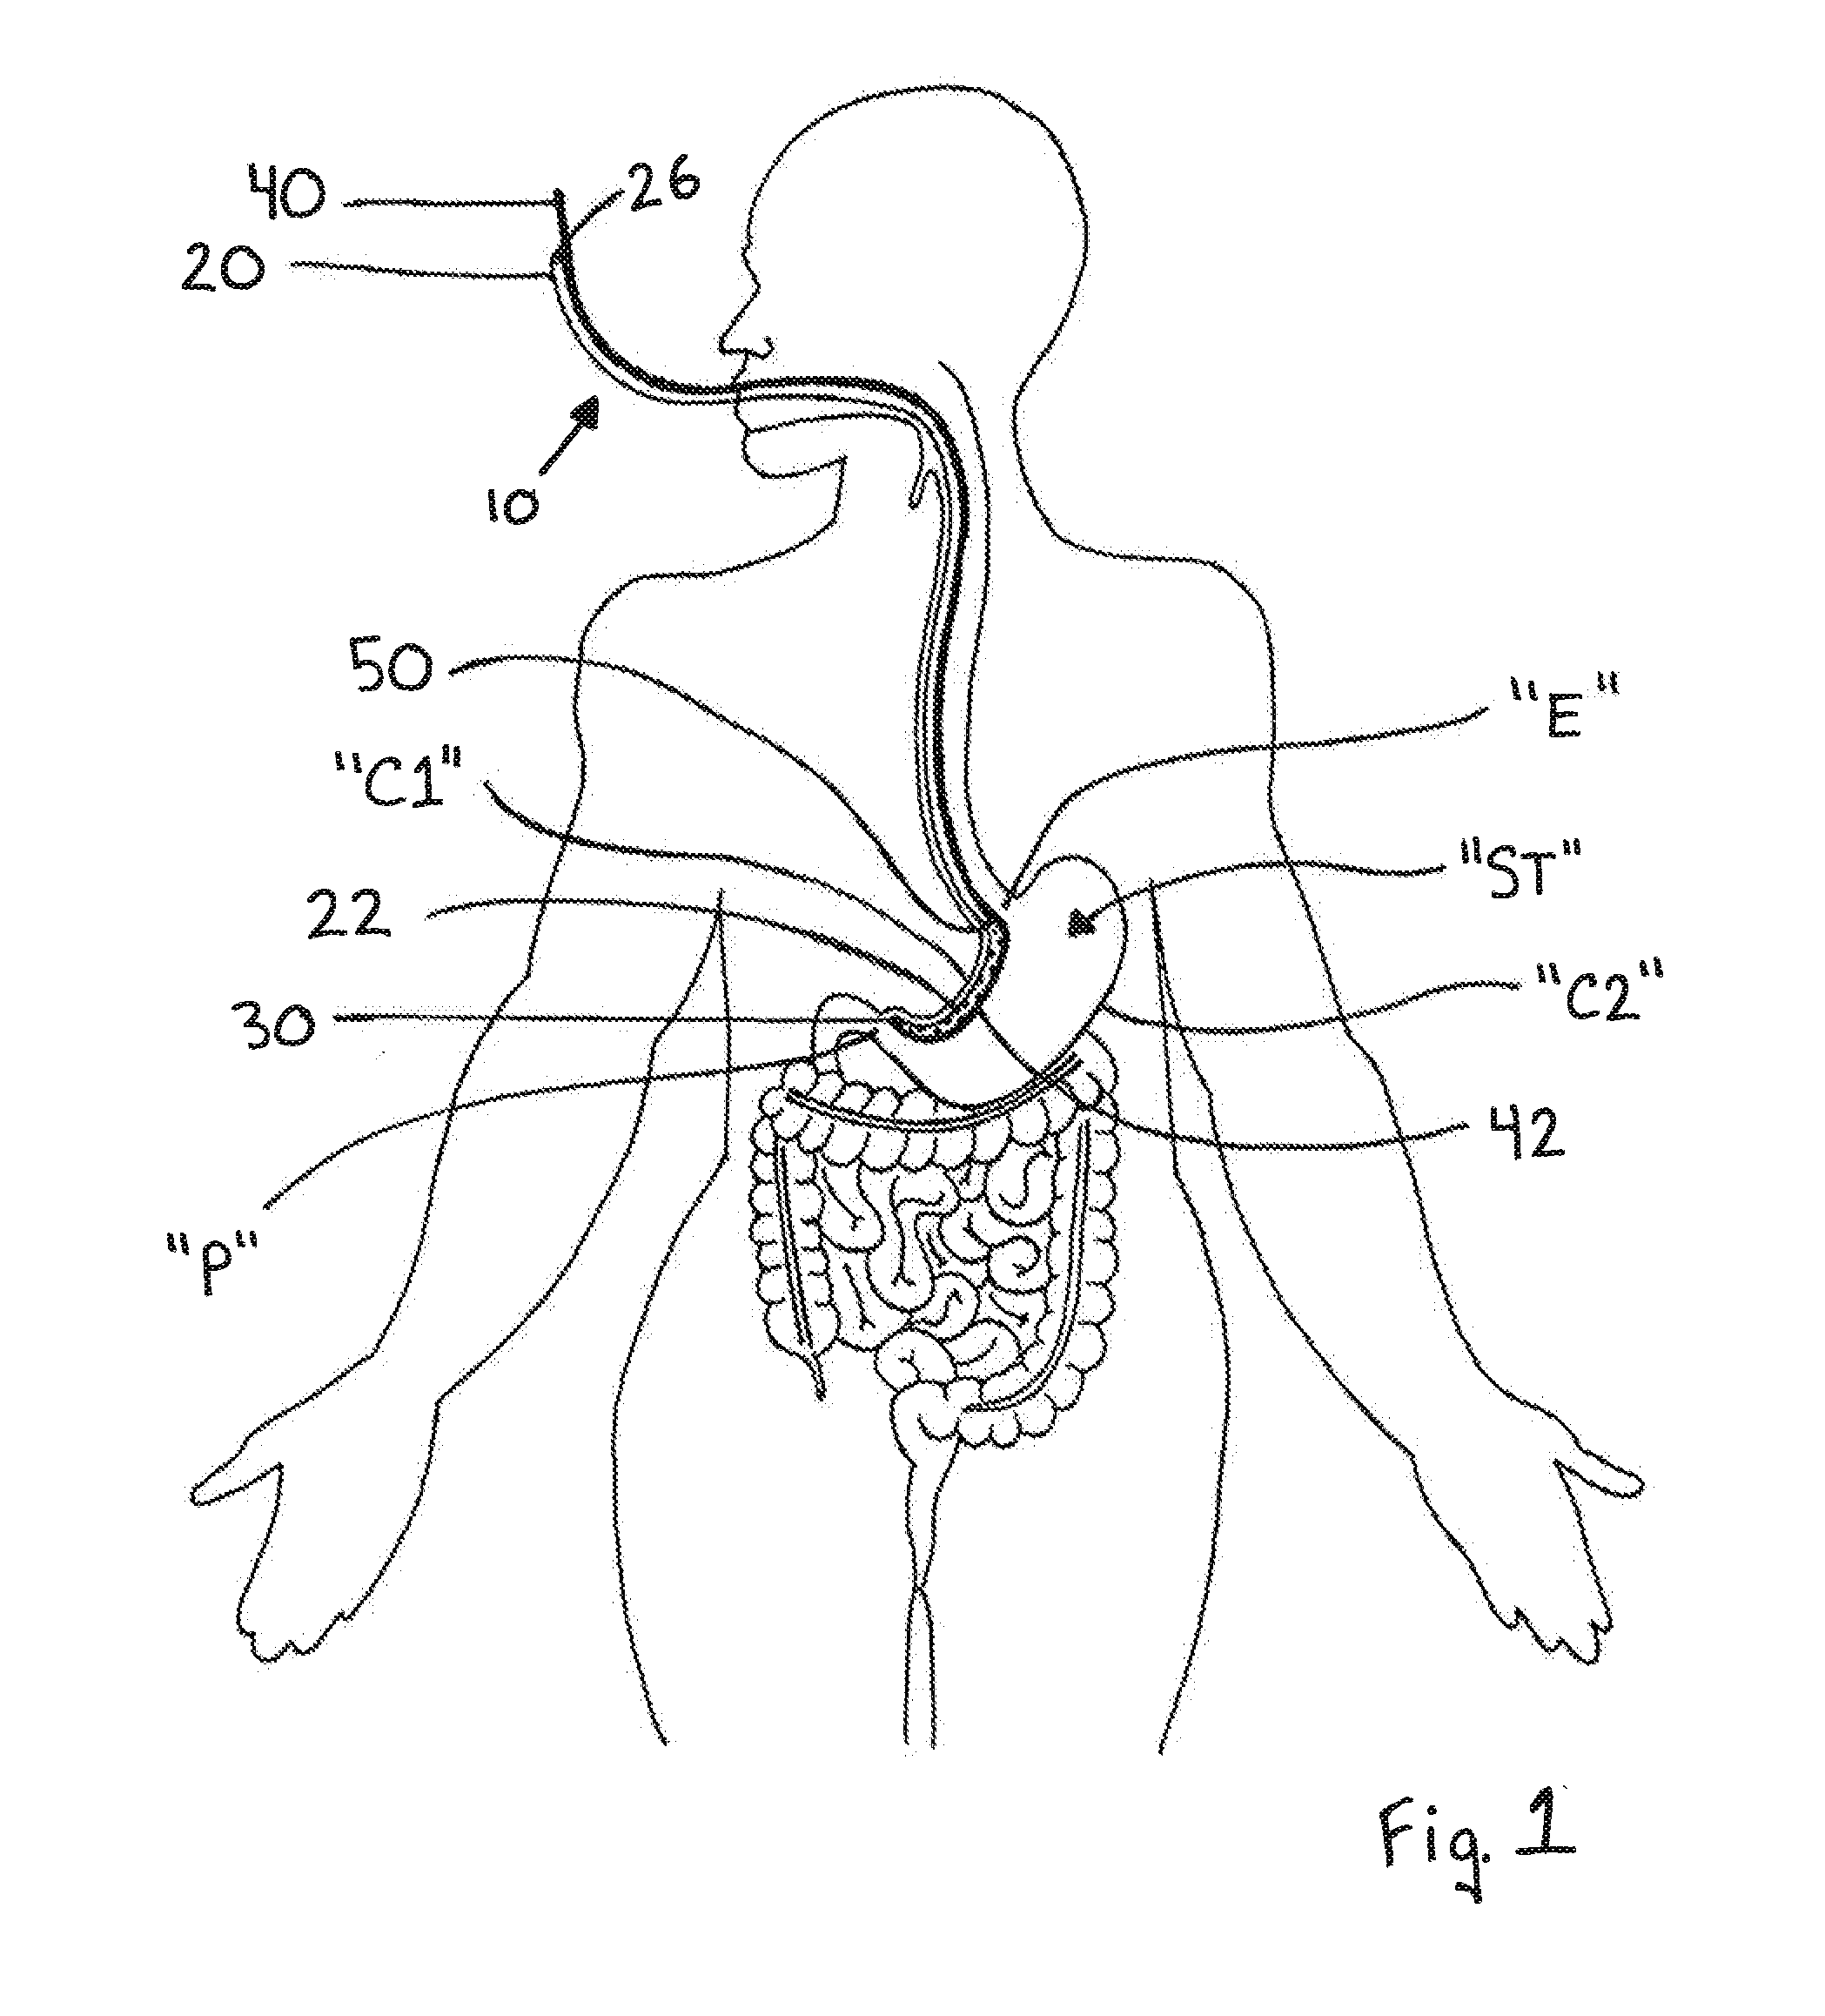 Devices and methods facilitating sleeve gastrectomy procedures